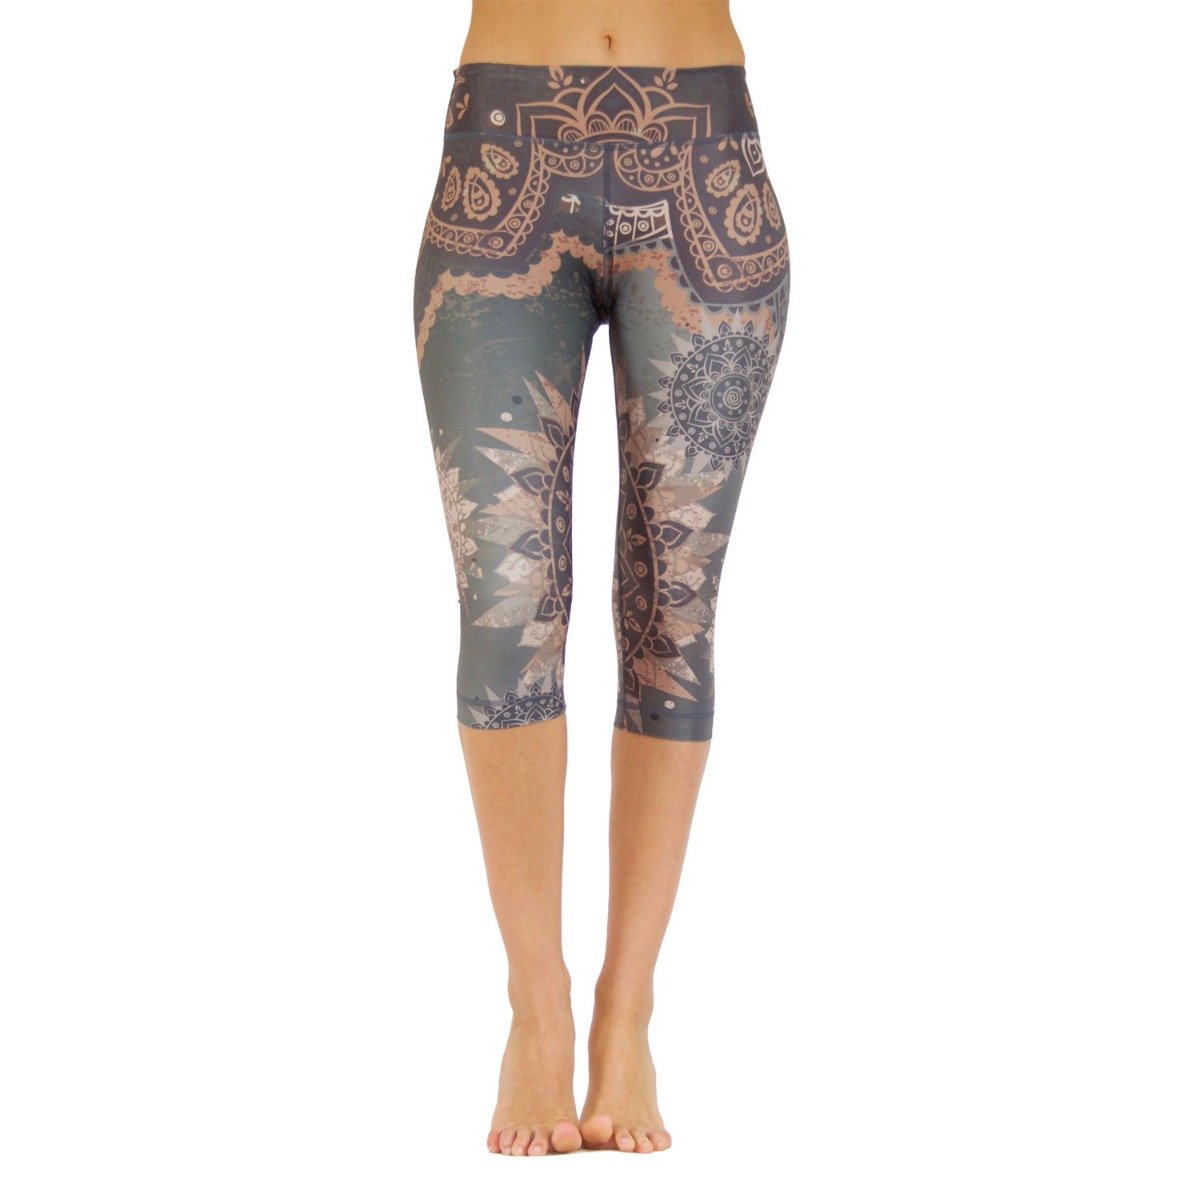 These $25 Yoga Pants on Amazon Have Over 6,800 5-Star Reviews